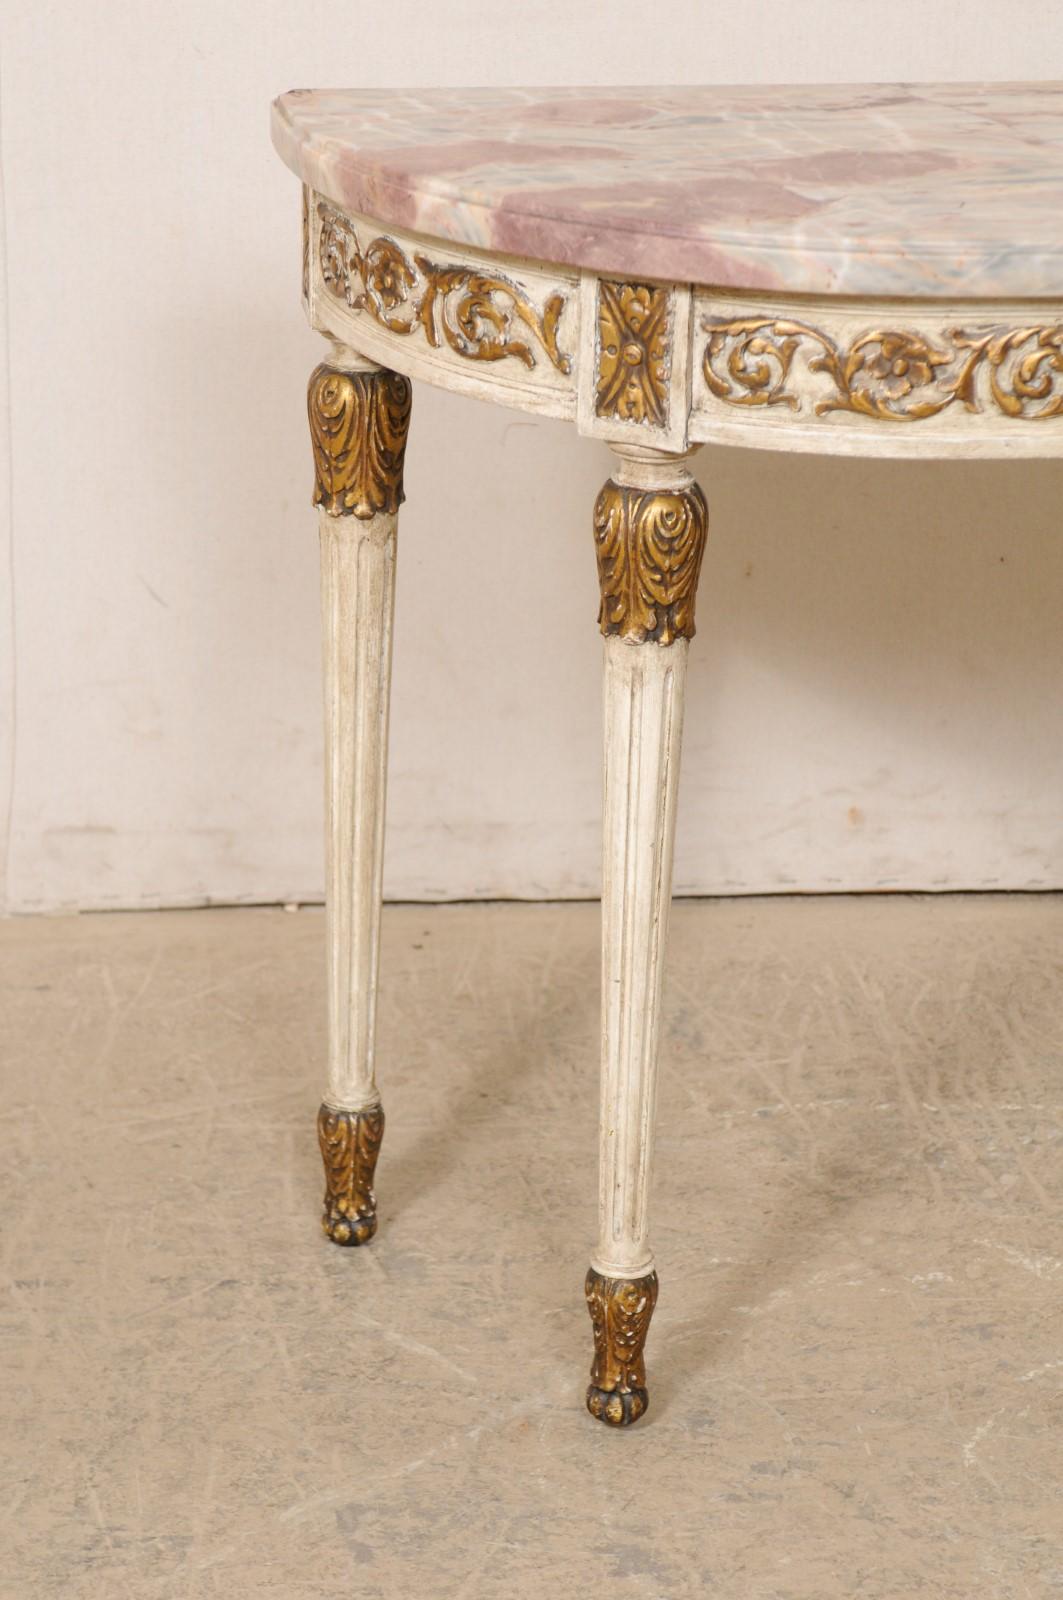 A French demi-lune console table with its original marble top from the early 20th century. This antique table from France is half-moon shaped with beautifully colored marble, which rests atop an exquisitely carved decor of leaves and flowers on its